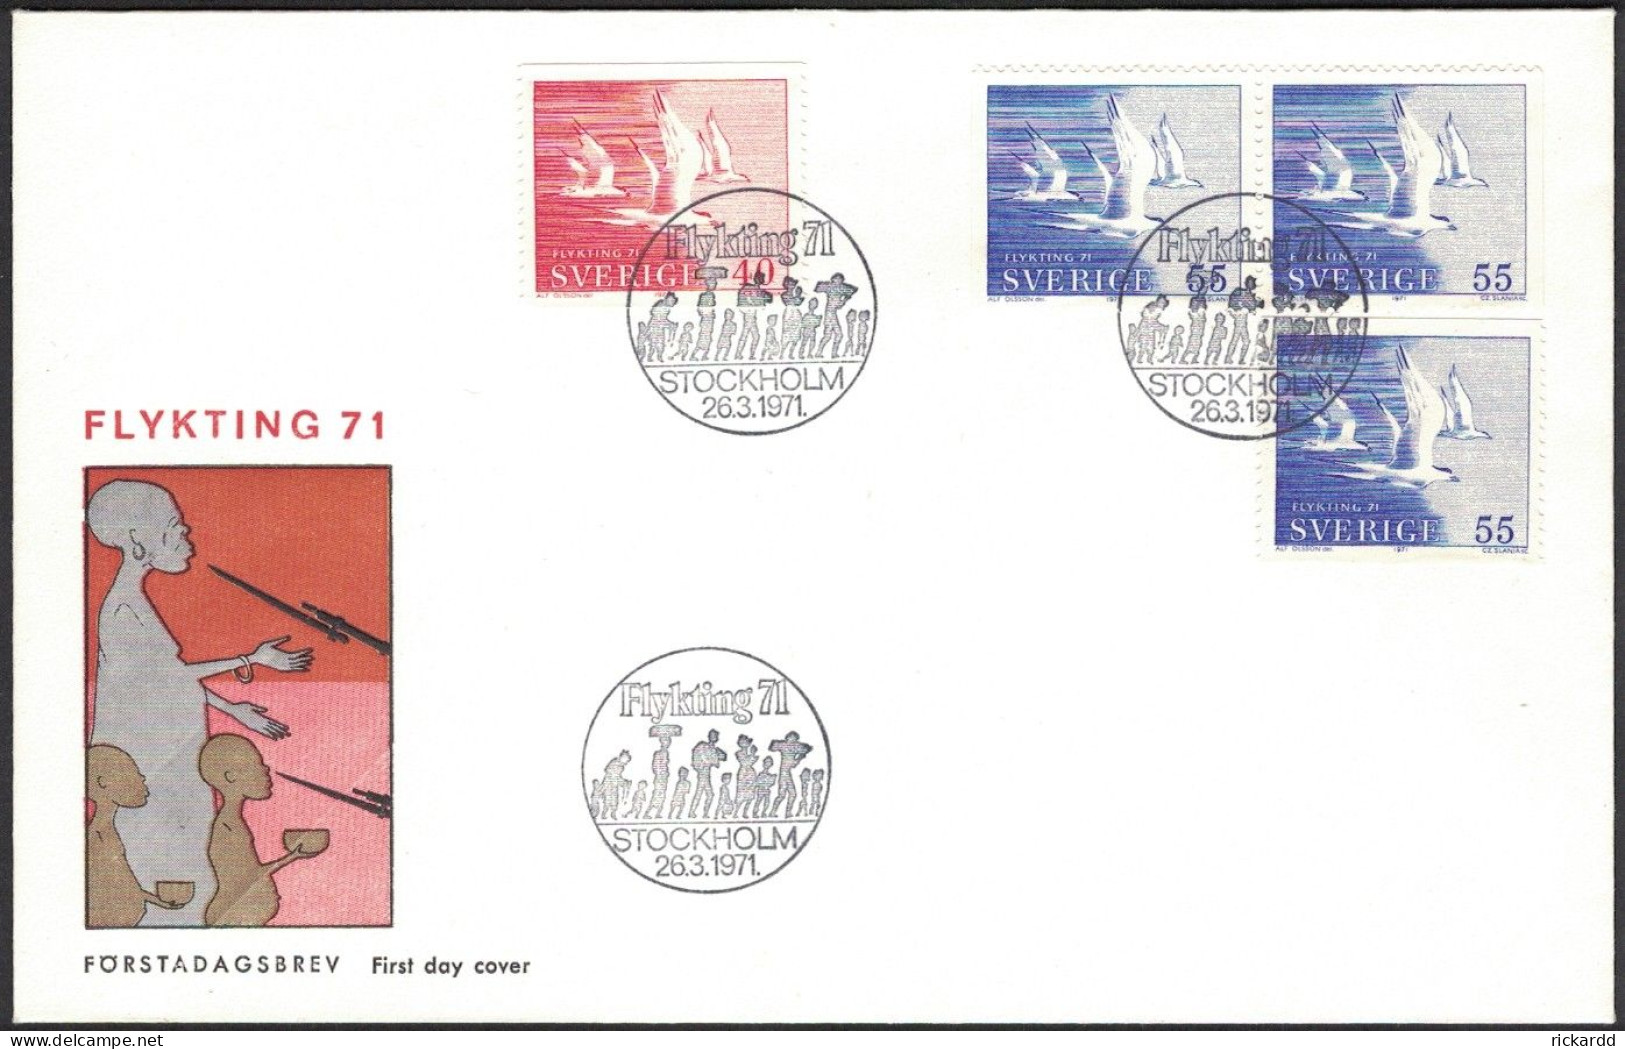 Sweden - FDC 26/3 1971 Flykting 71 *ILLUSTRATED* - FDC